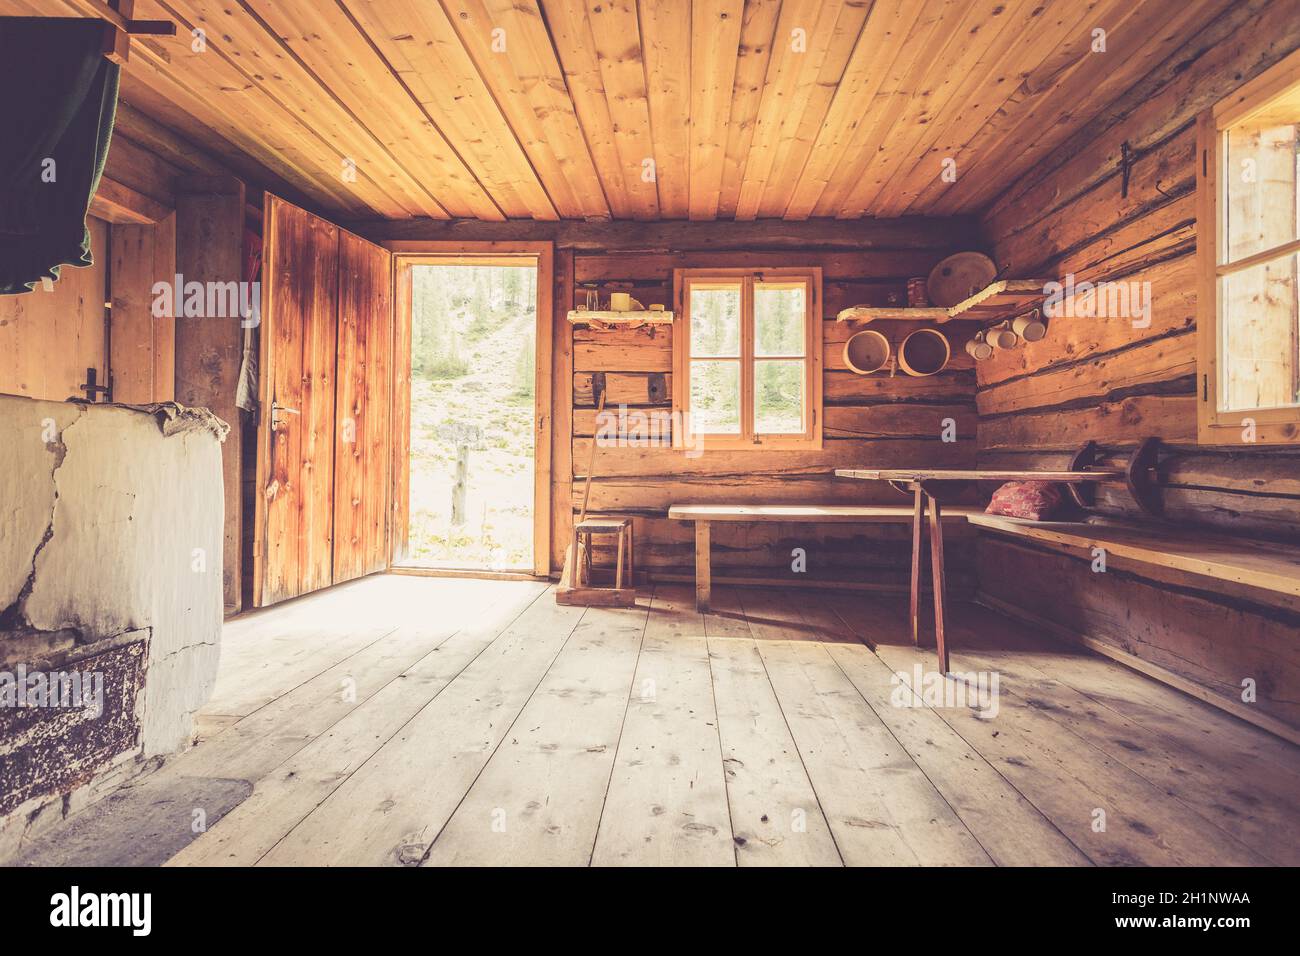 Interior of an old rustic abandoned alpine chalet in Austria Stock Photo